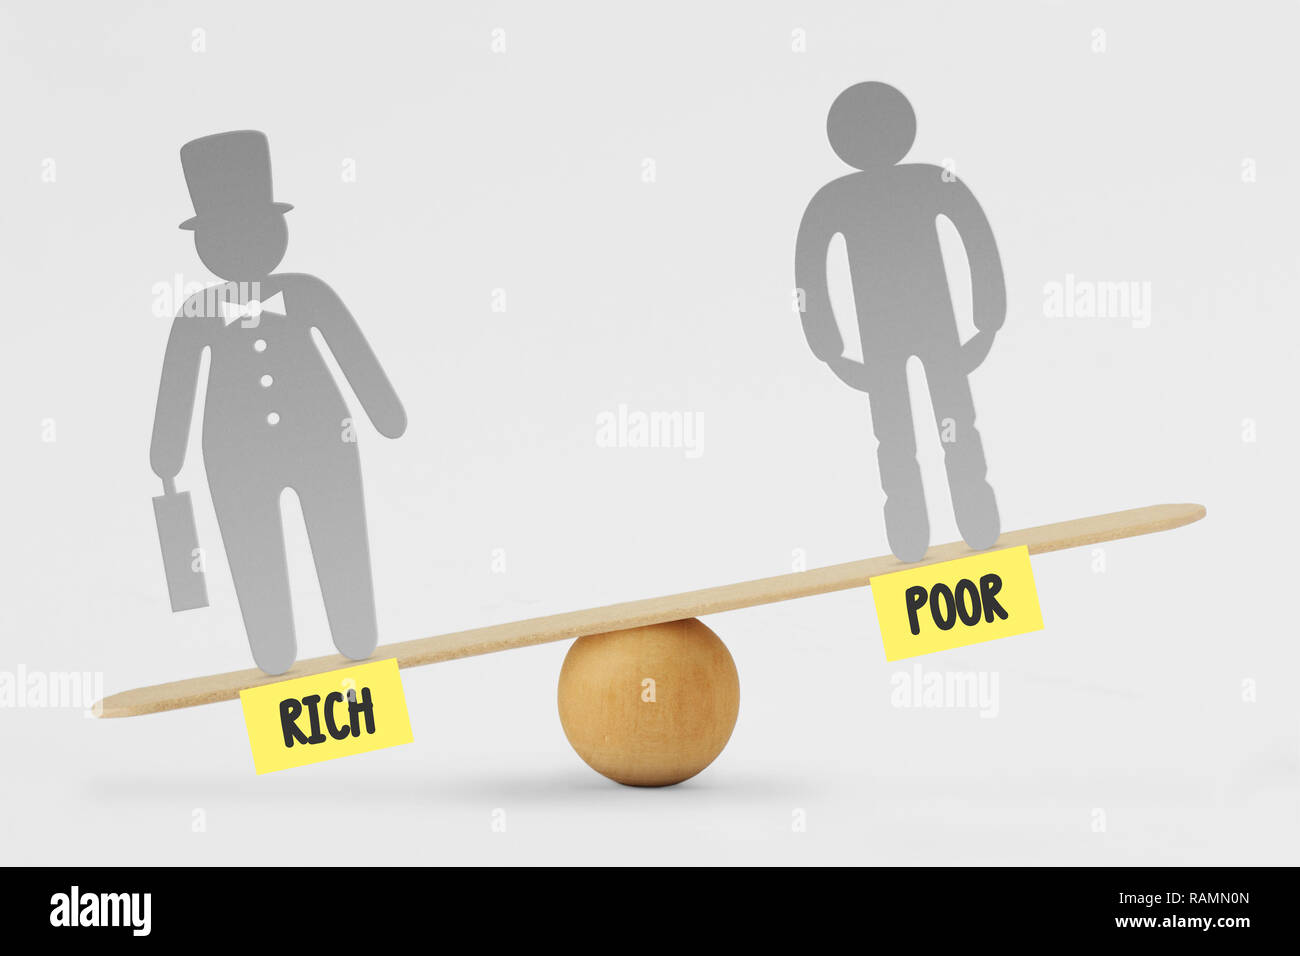 Poor and rich people on balance scale - Concept of social inequality between rich and poor people Stock Photo